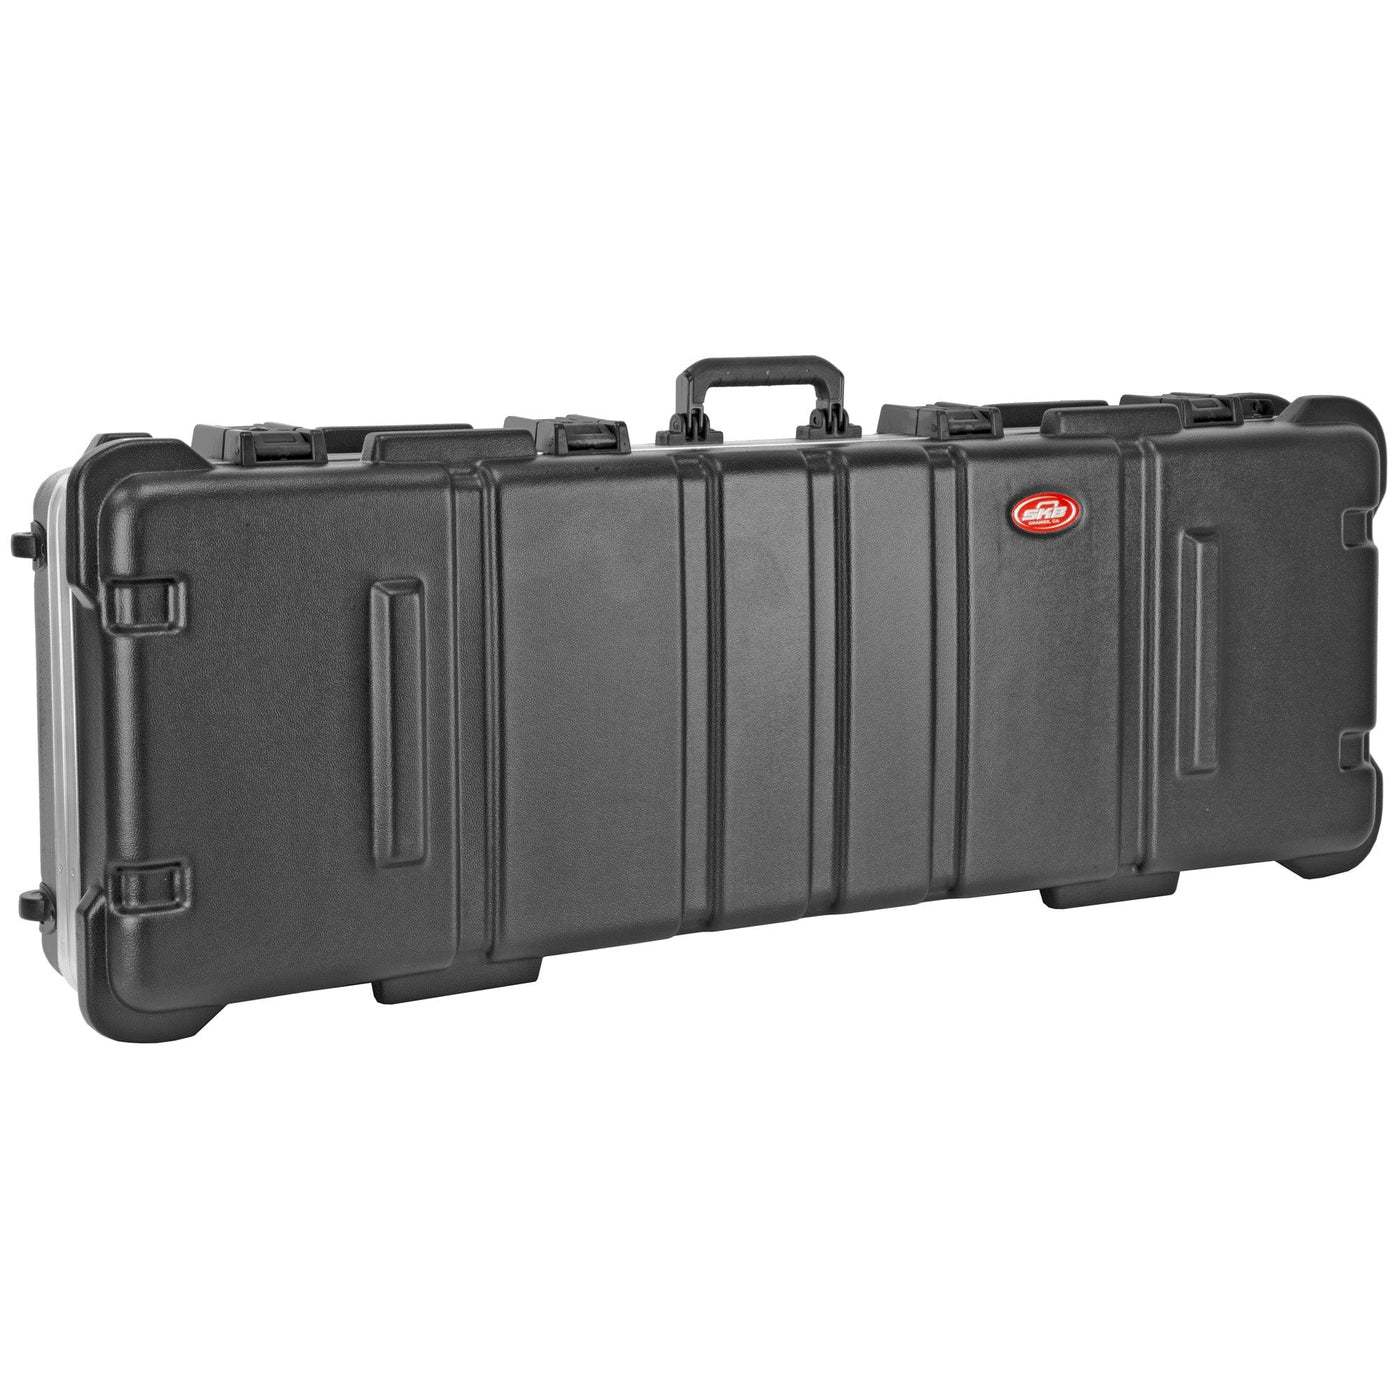 Skb Skb Ata Double Bow Case Black 50 In. Cases and Storage